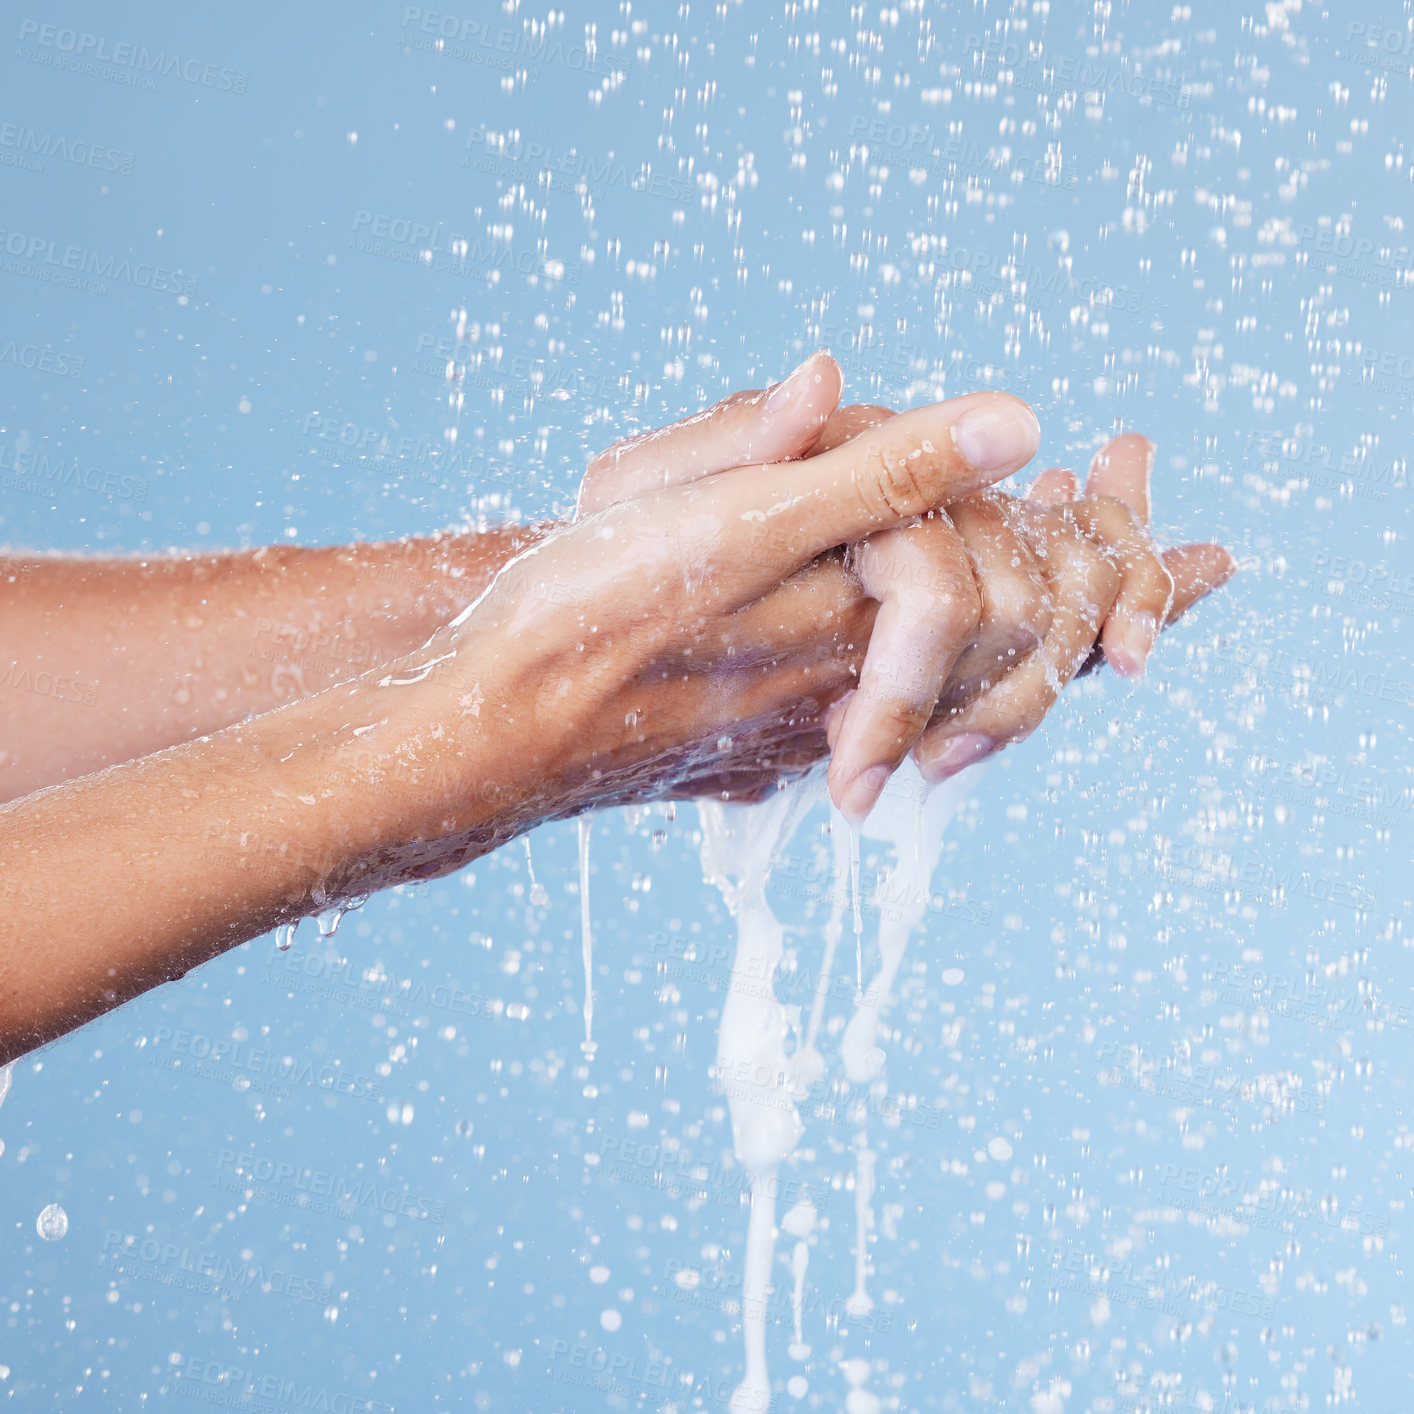 Buy stock photo Studio shot of an unrecognisable woman holding her hands under running water against a blue background